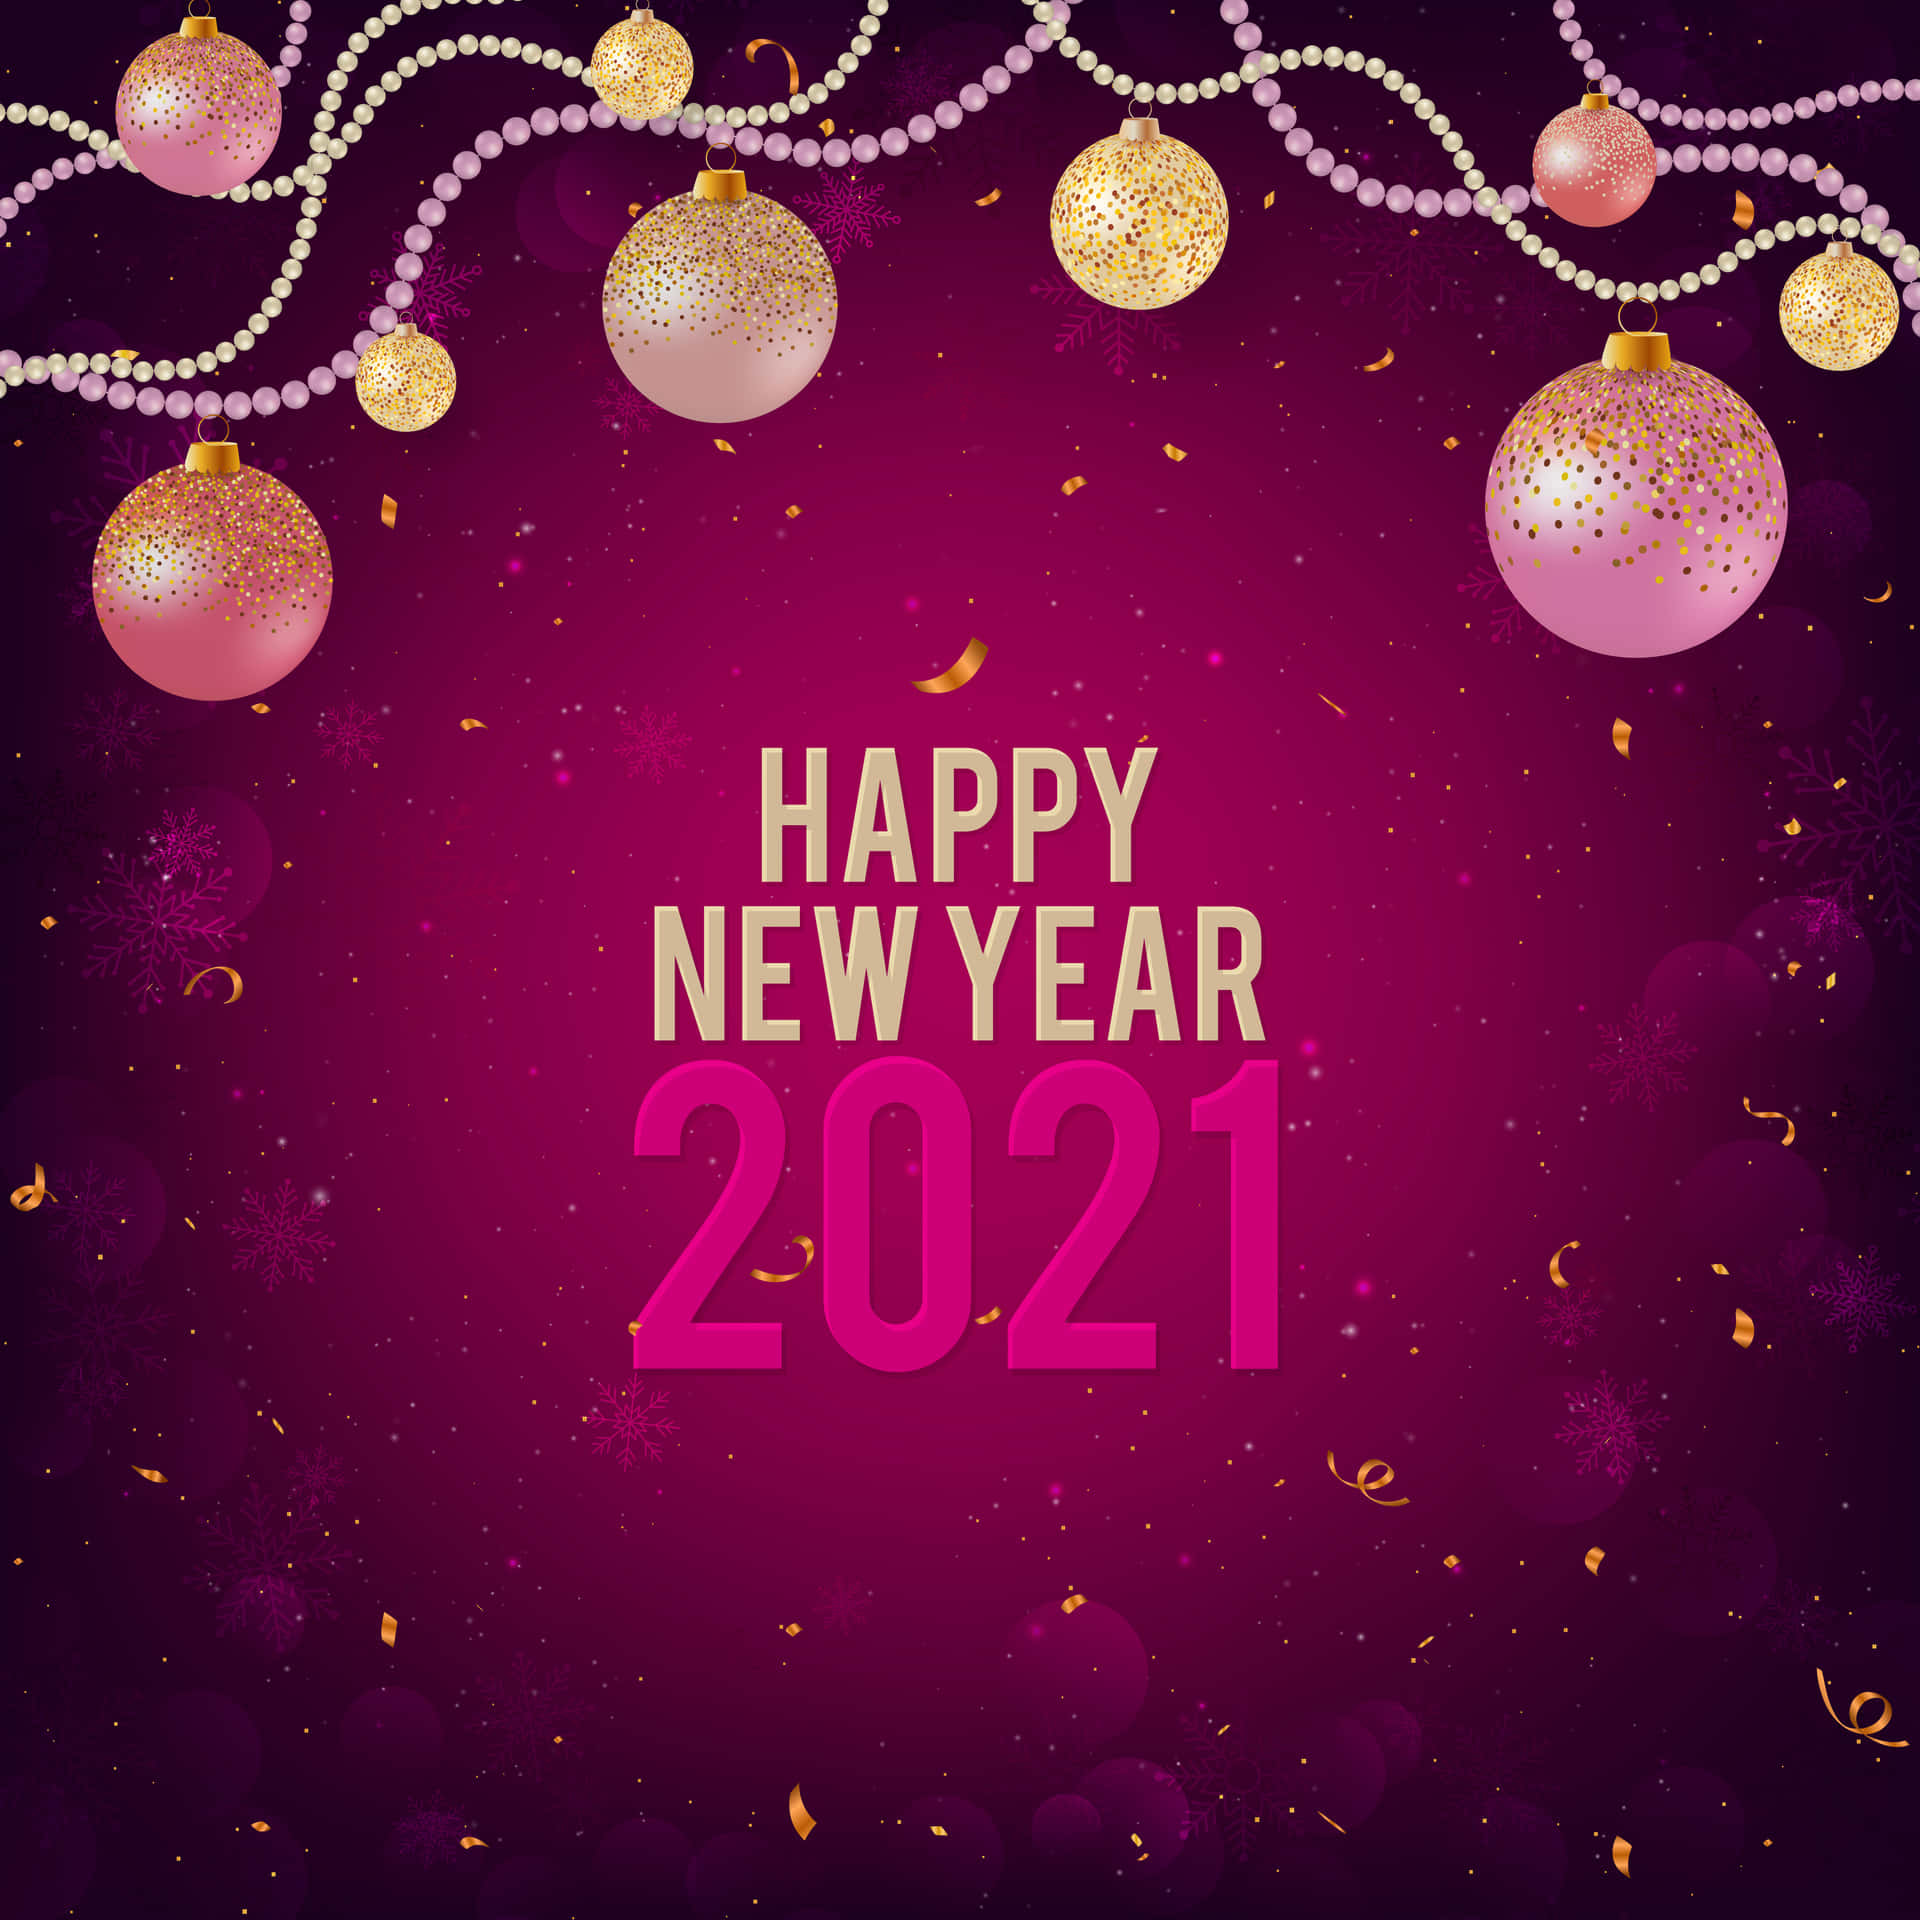 Start Your 2021 on the Right Foot With This Super Sunny 2021 Happy New Year Wallpaper! Wallpaper